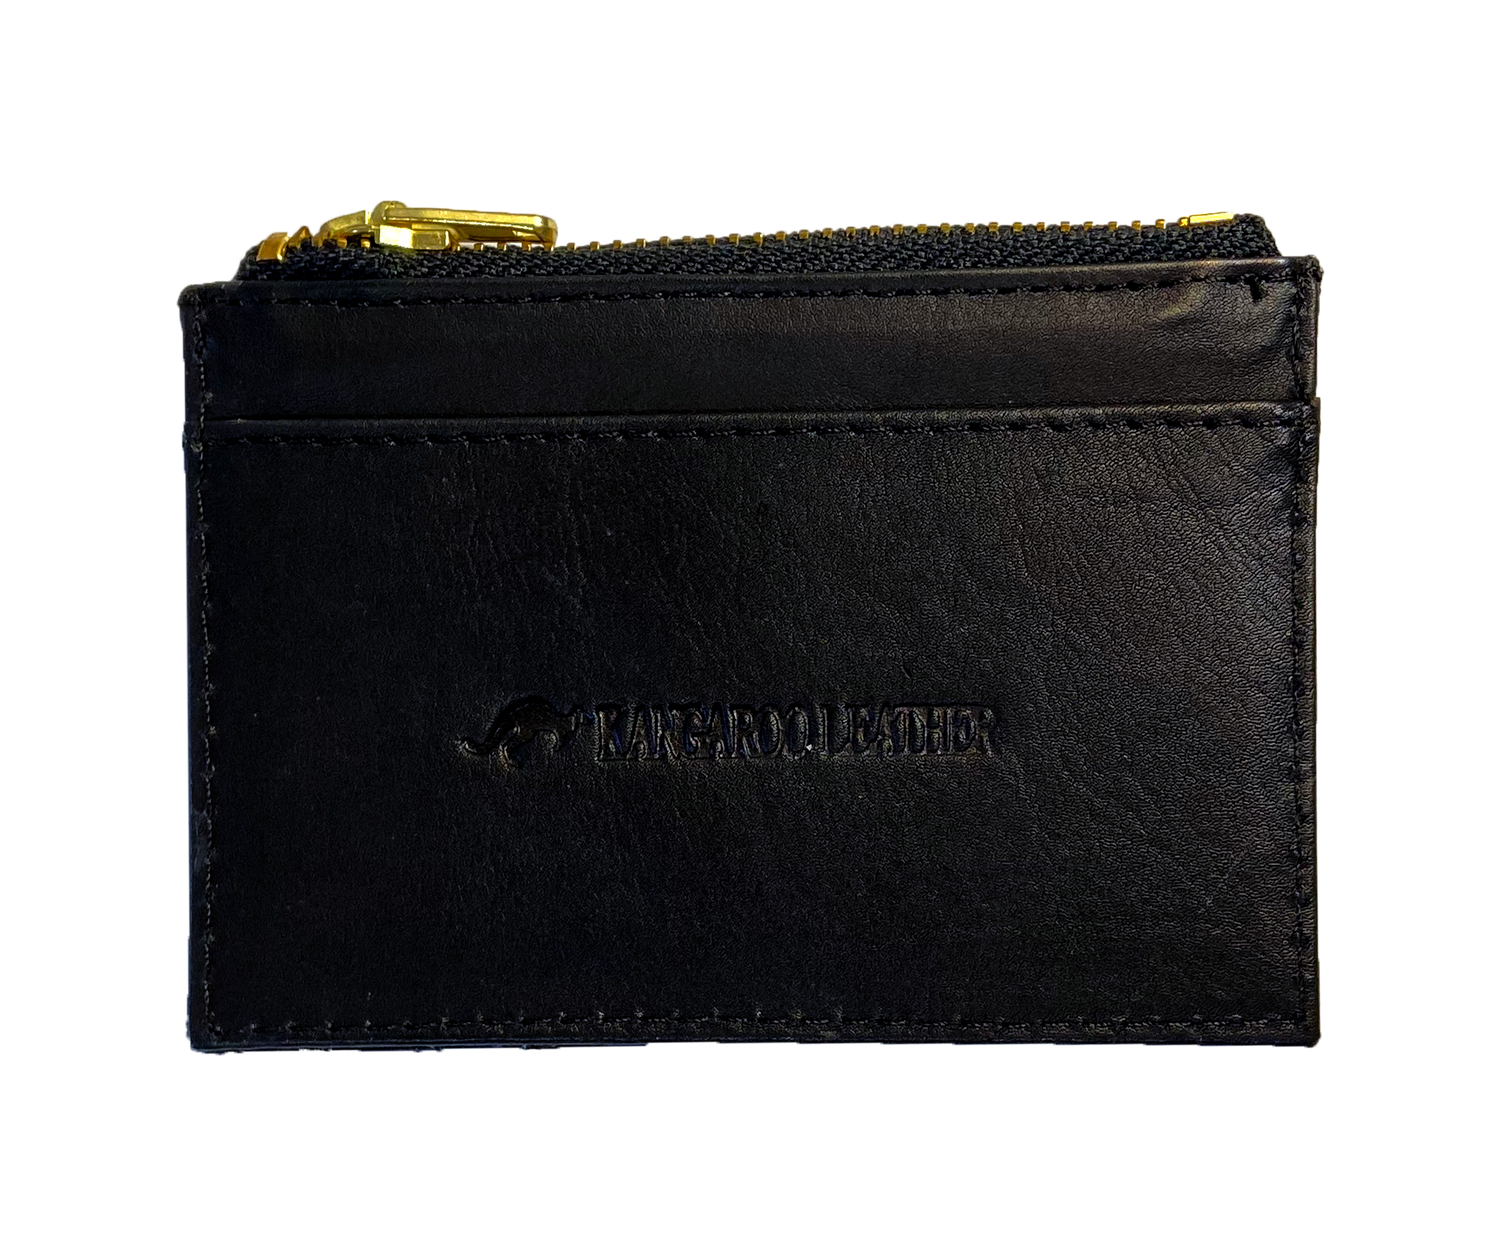 Black Ditch the bulky wallet! Our Slim Wallet fits any pocket. Sleek design, Australian Kangaroo Leather. Available in Black, Tan, or Choc. Real deal, roo leather.